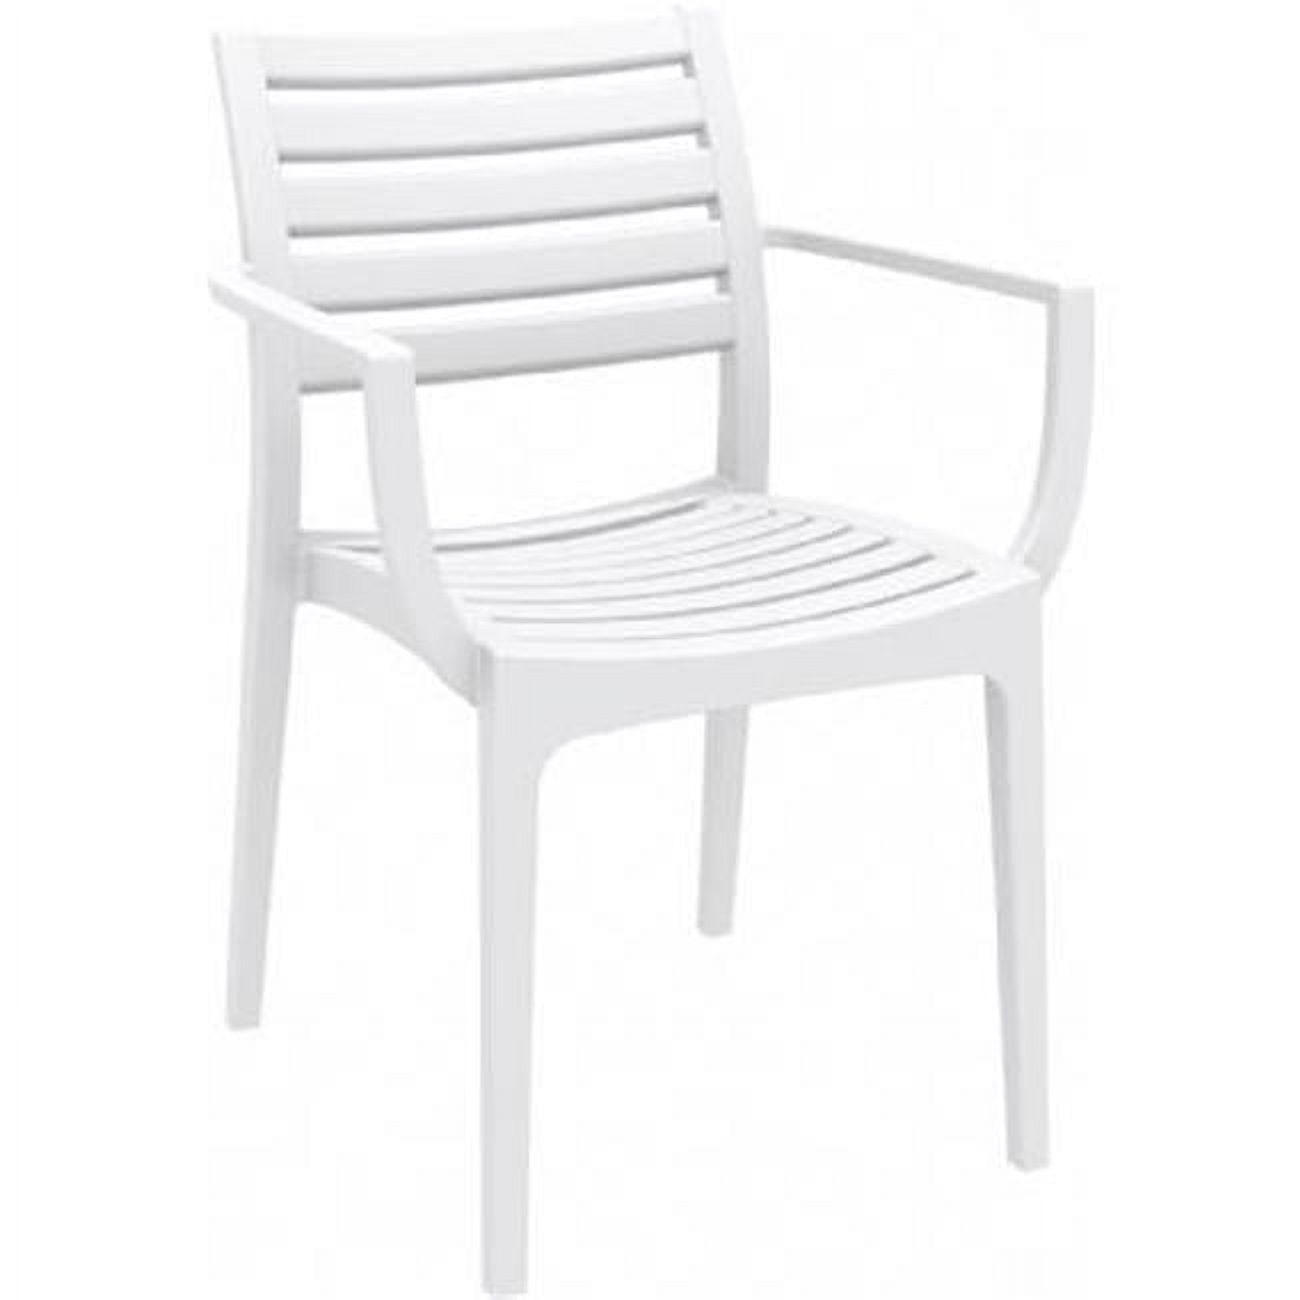 Artemis Outdoor Dining Arm Chair  White - Set of 2 - image 1 of 1